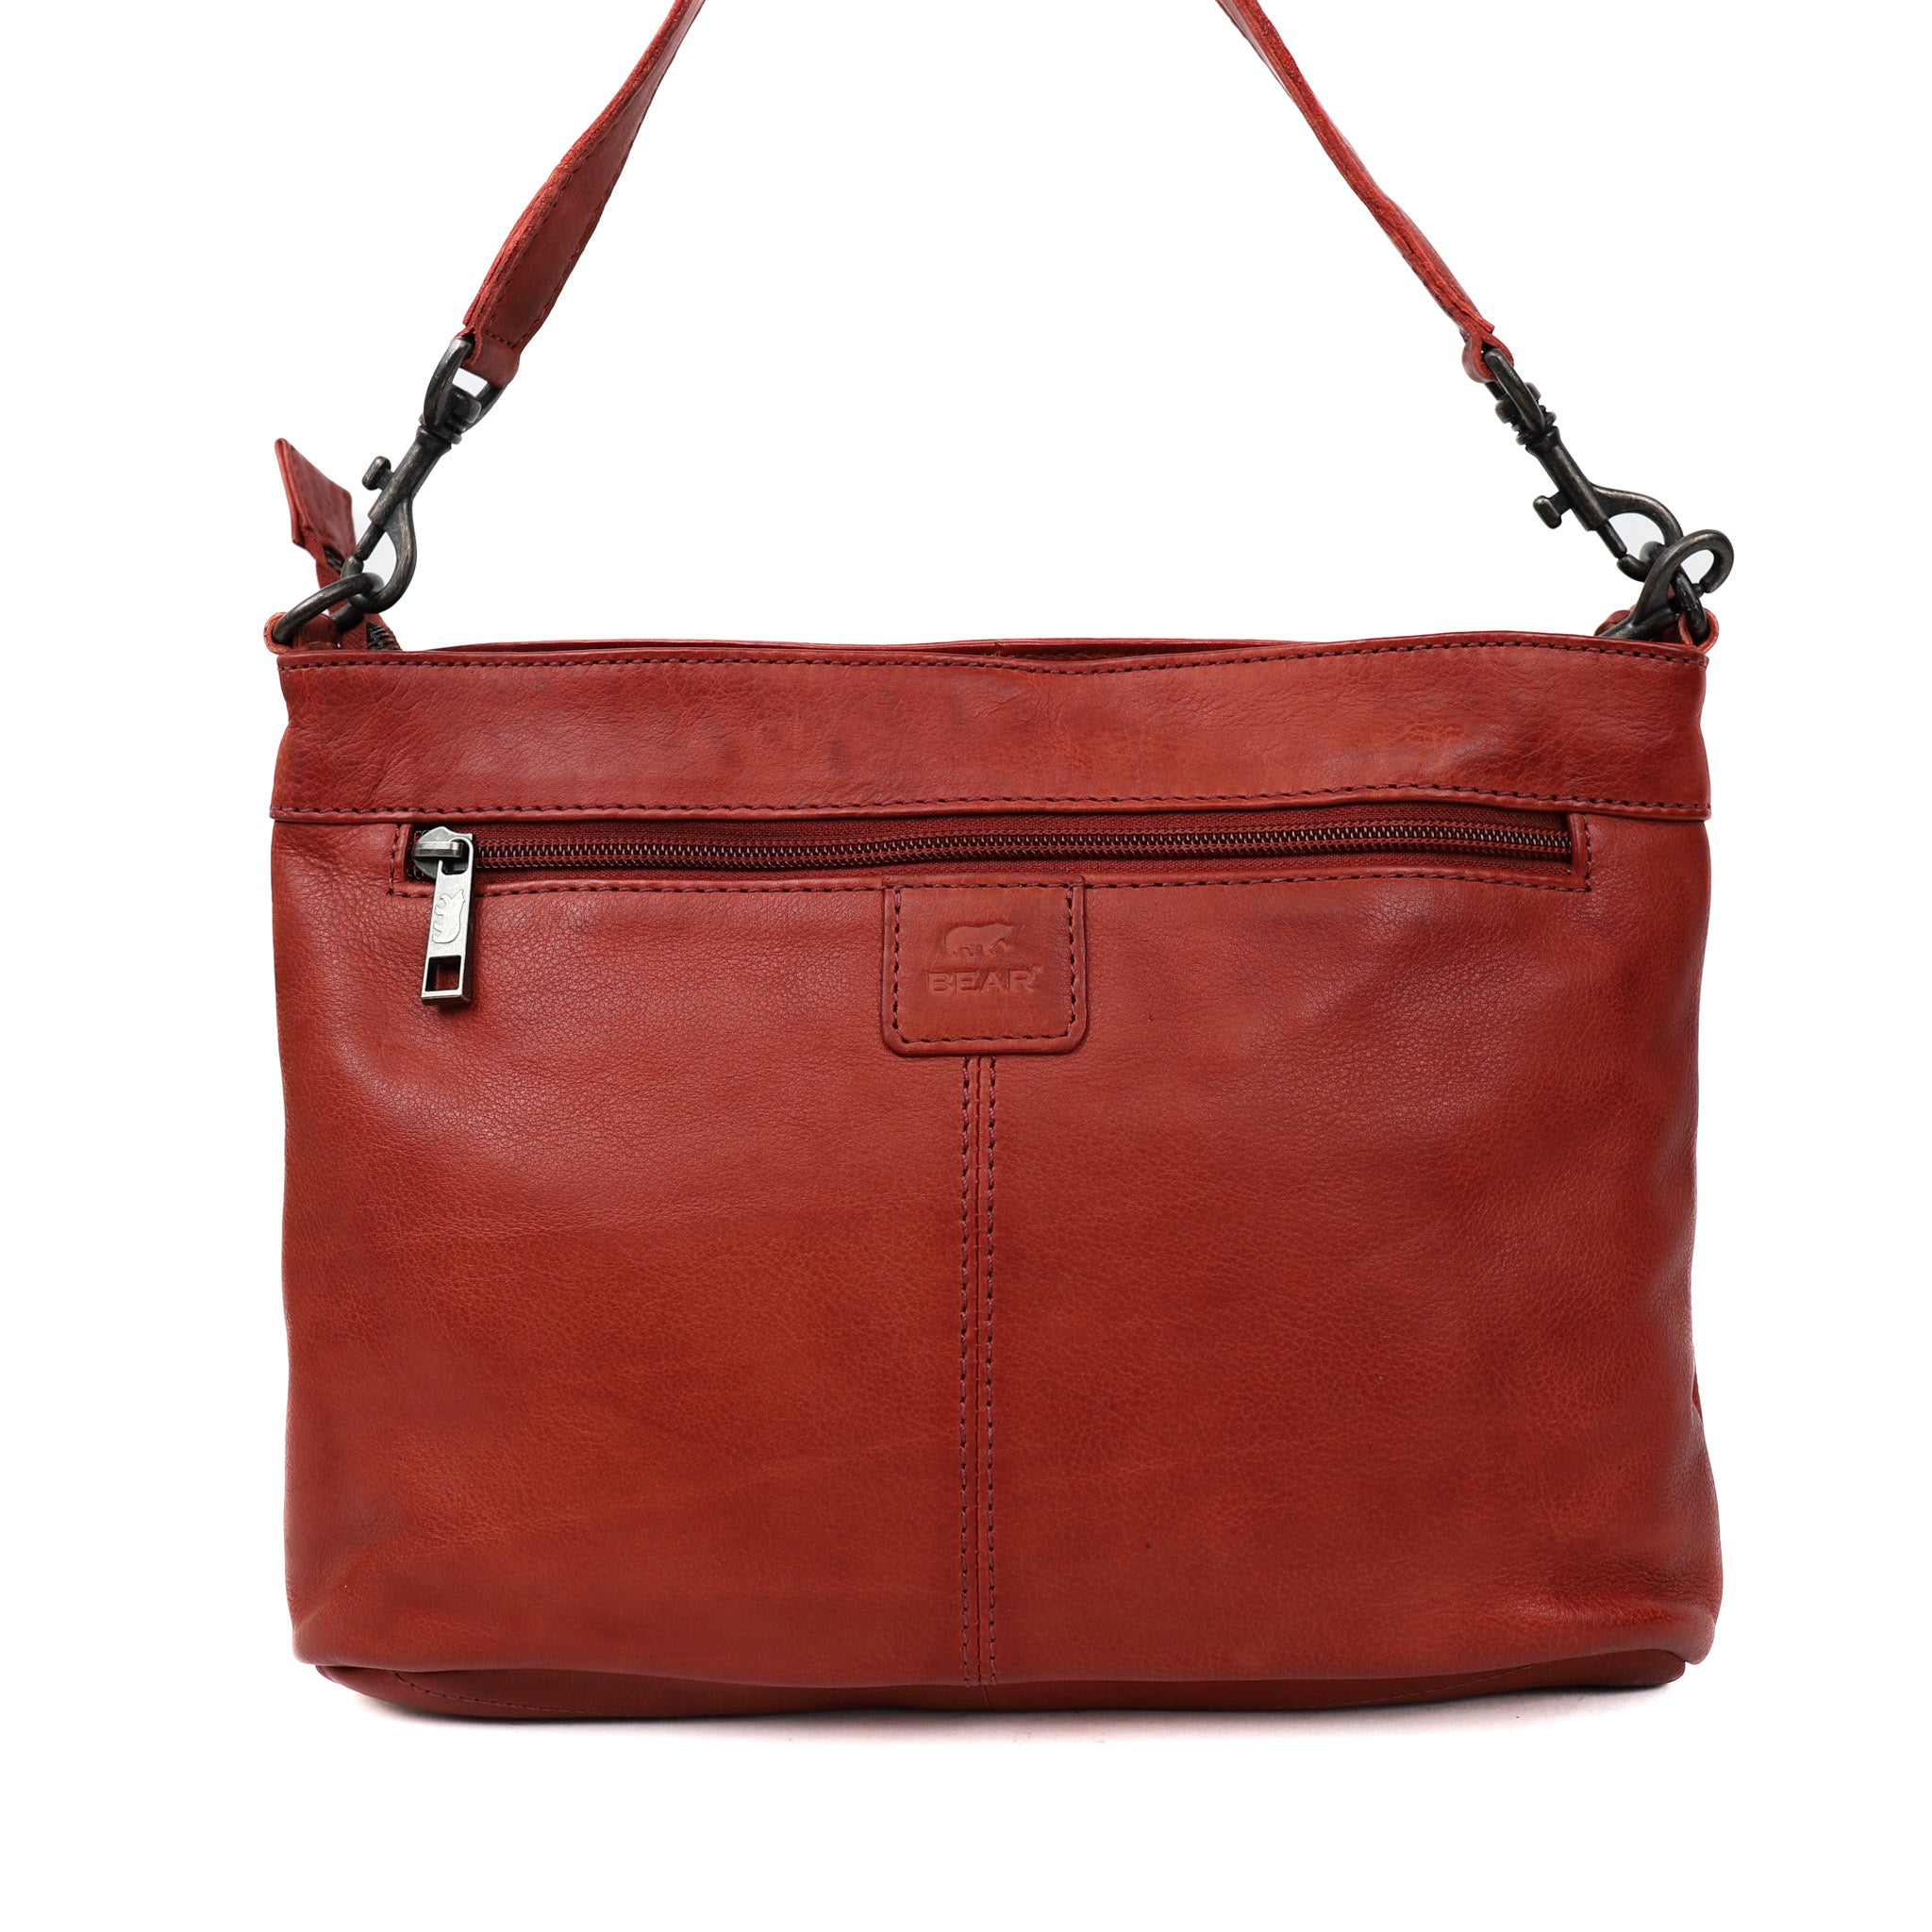 Hand/shoulder bag 'Angelica' red - CP 1536